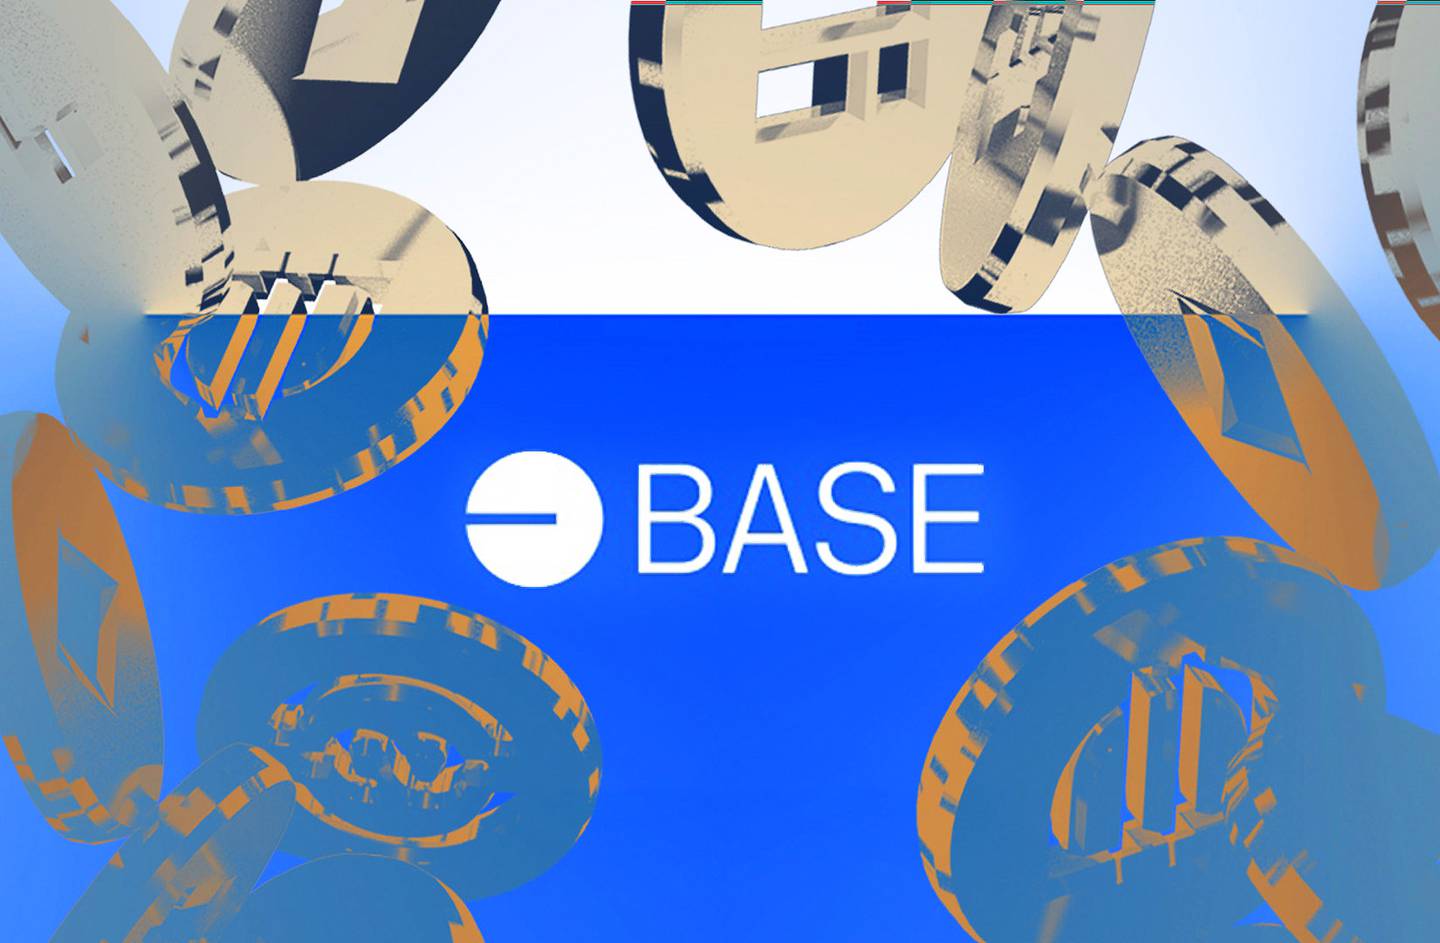 Coinbase logo as a background with coin tokens raining down the image